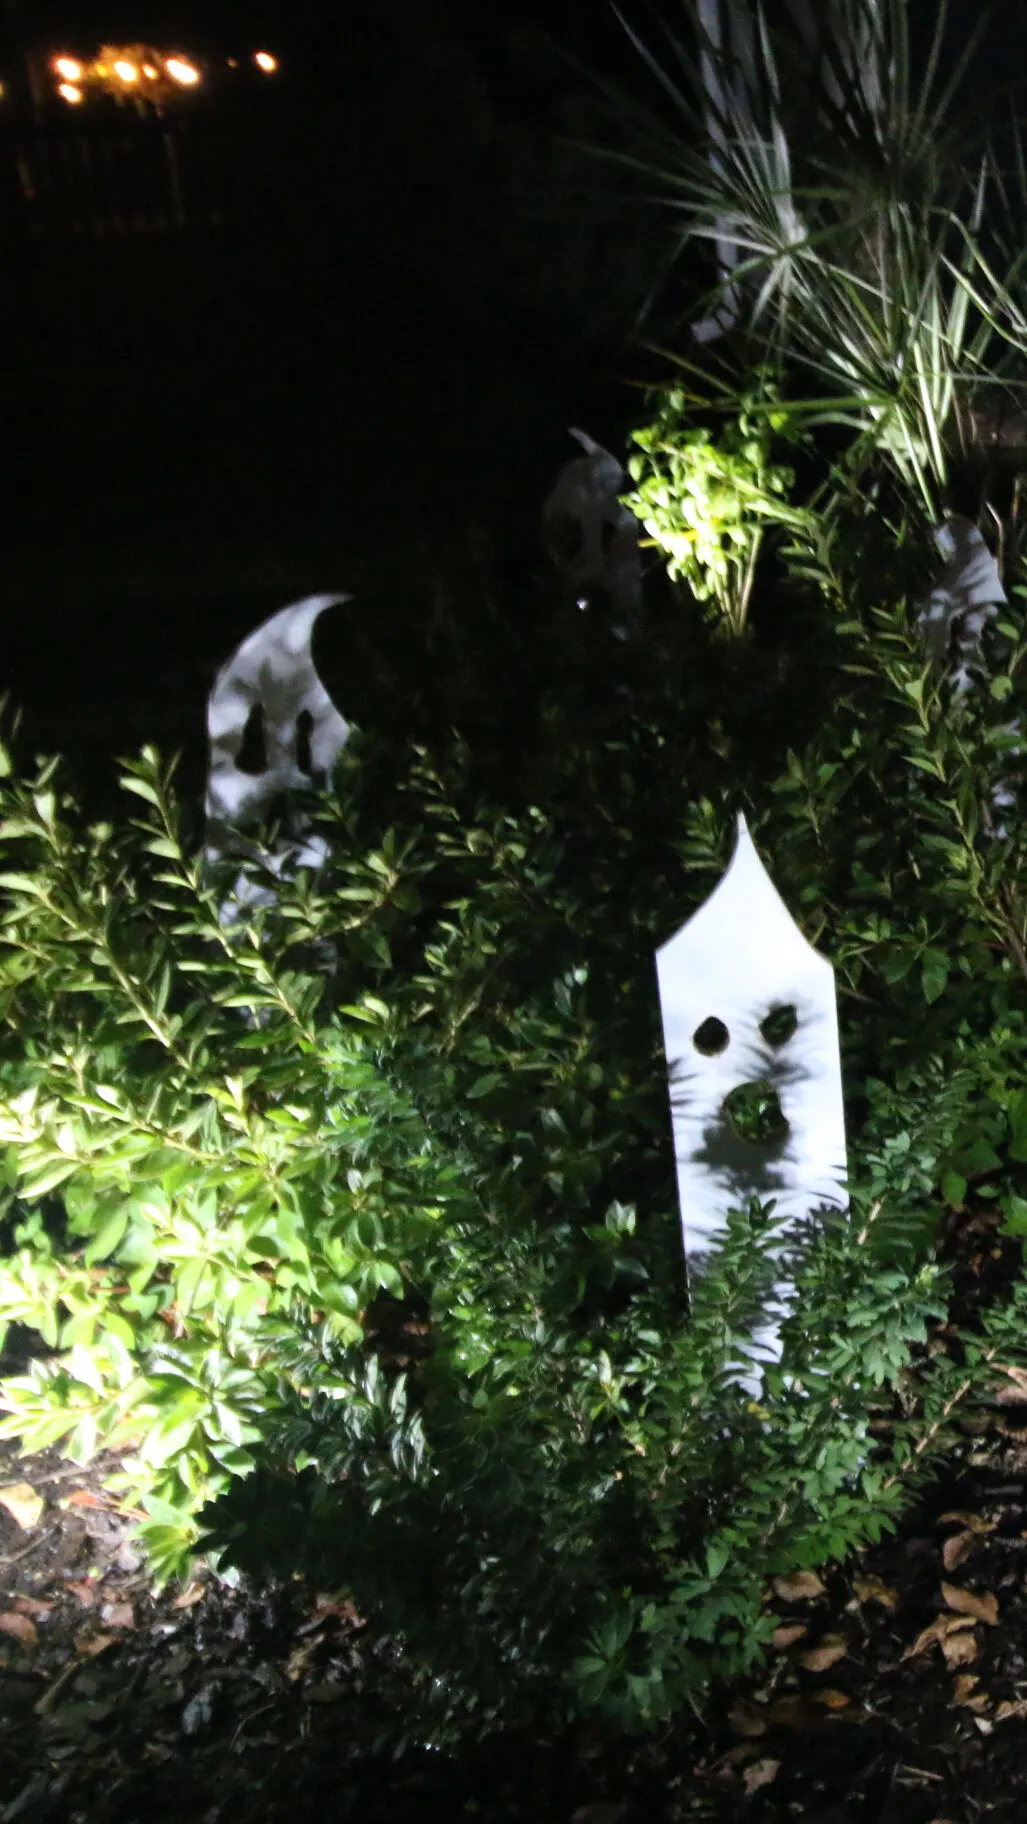 Wooden ghosts in bushes at night